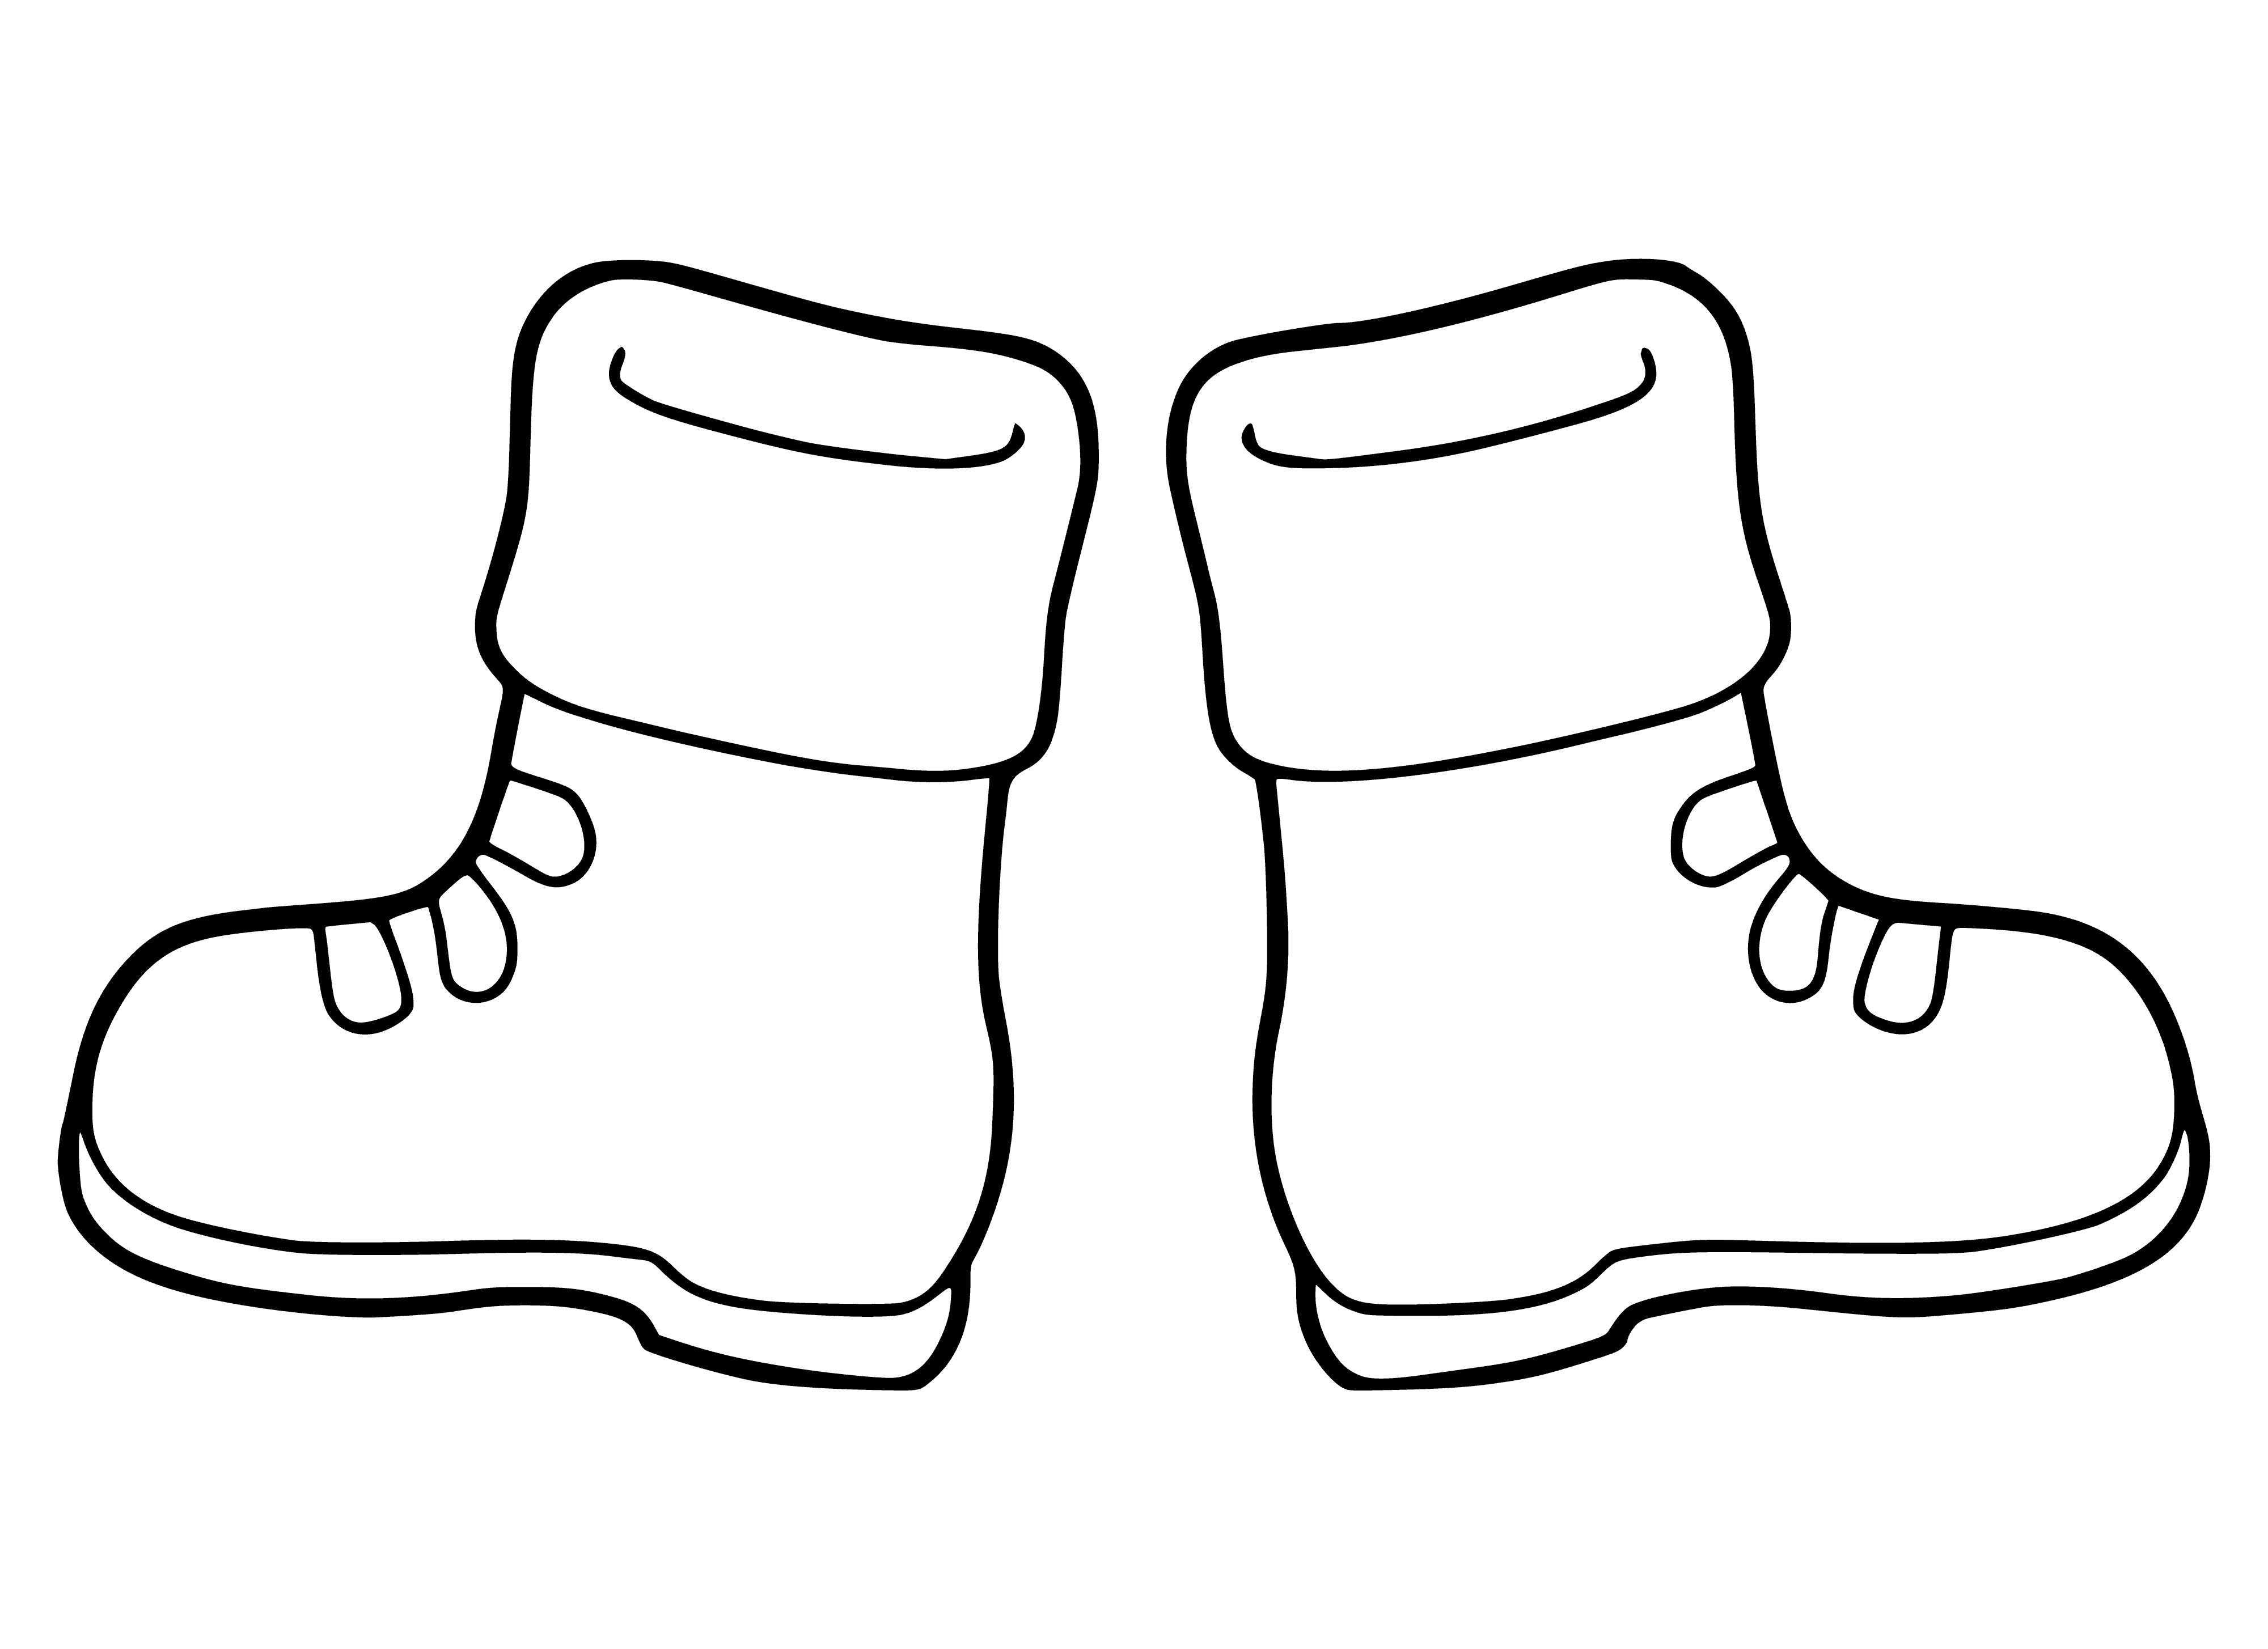 coloring page: Coloring page features a man & woman wearing boots: hers brown, his black. #coloring